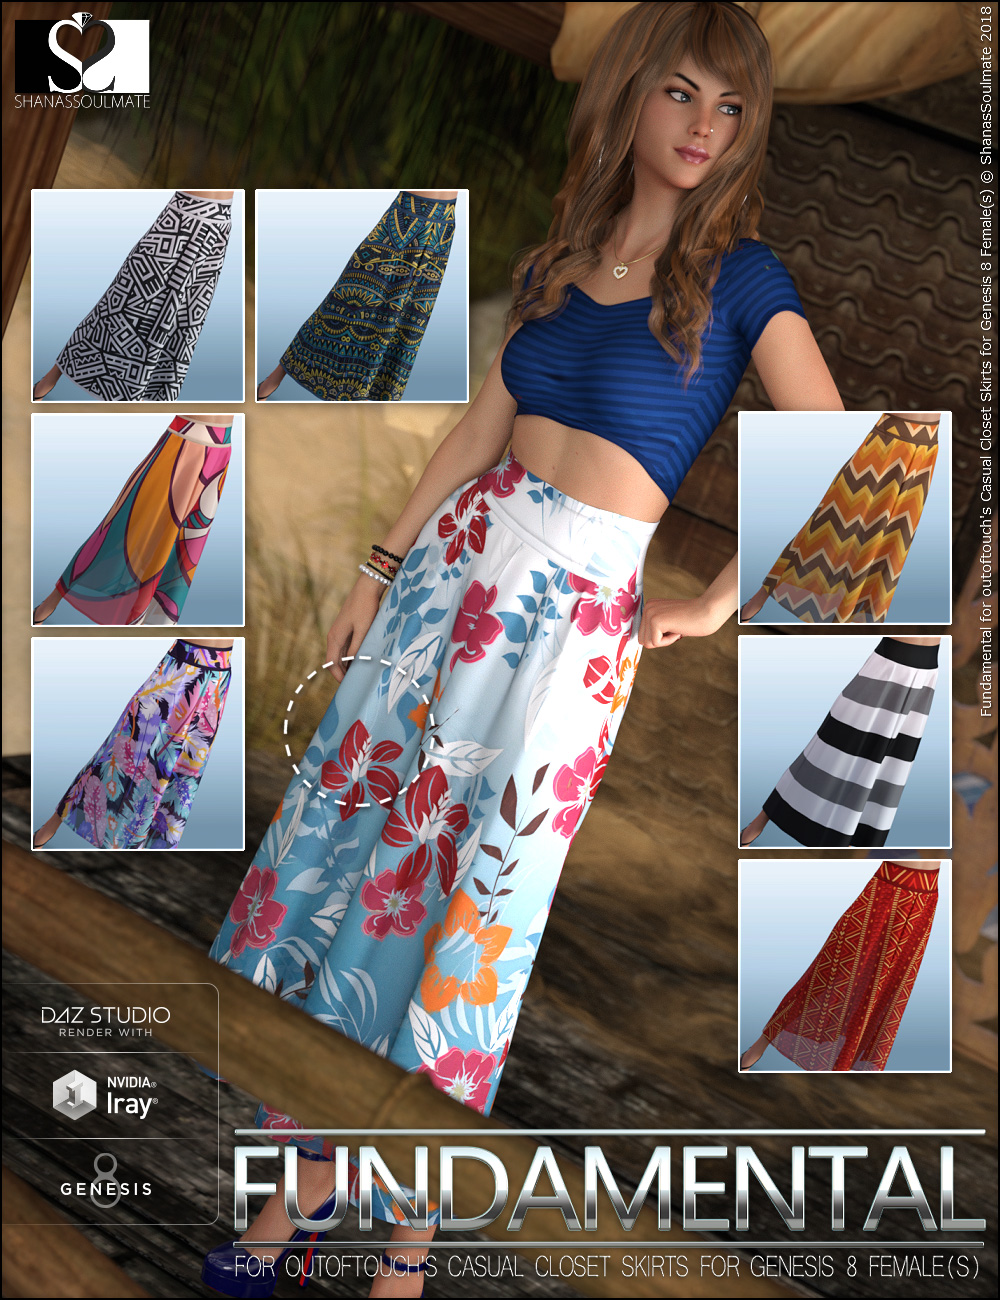 Fundamental Textures for OOT Casual Closet Skirt Collection by: ShanasSoulmate, 3D Models by Daz 3D